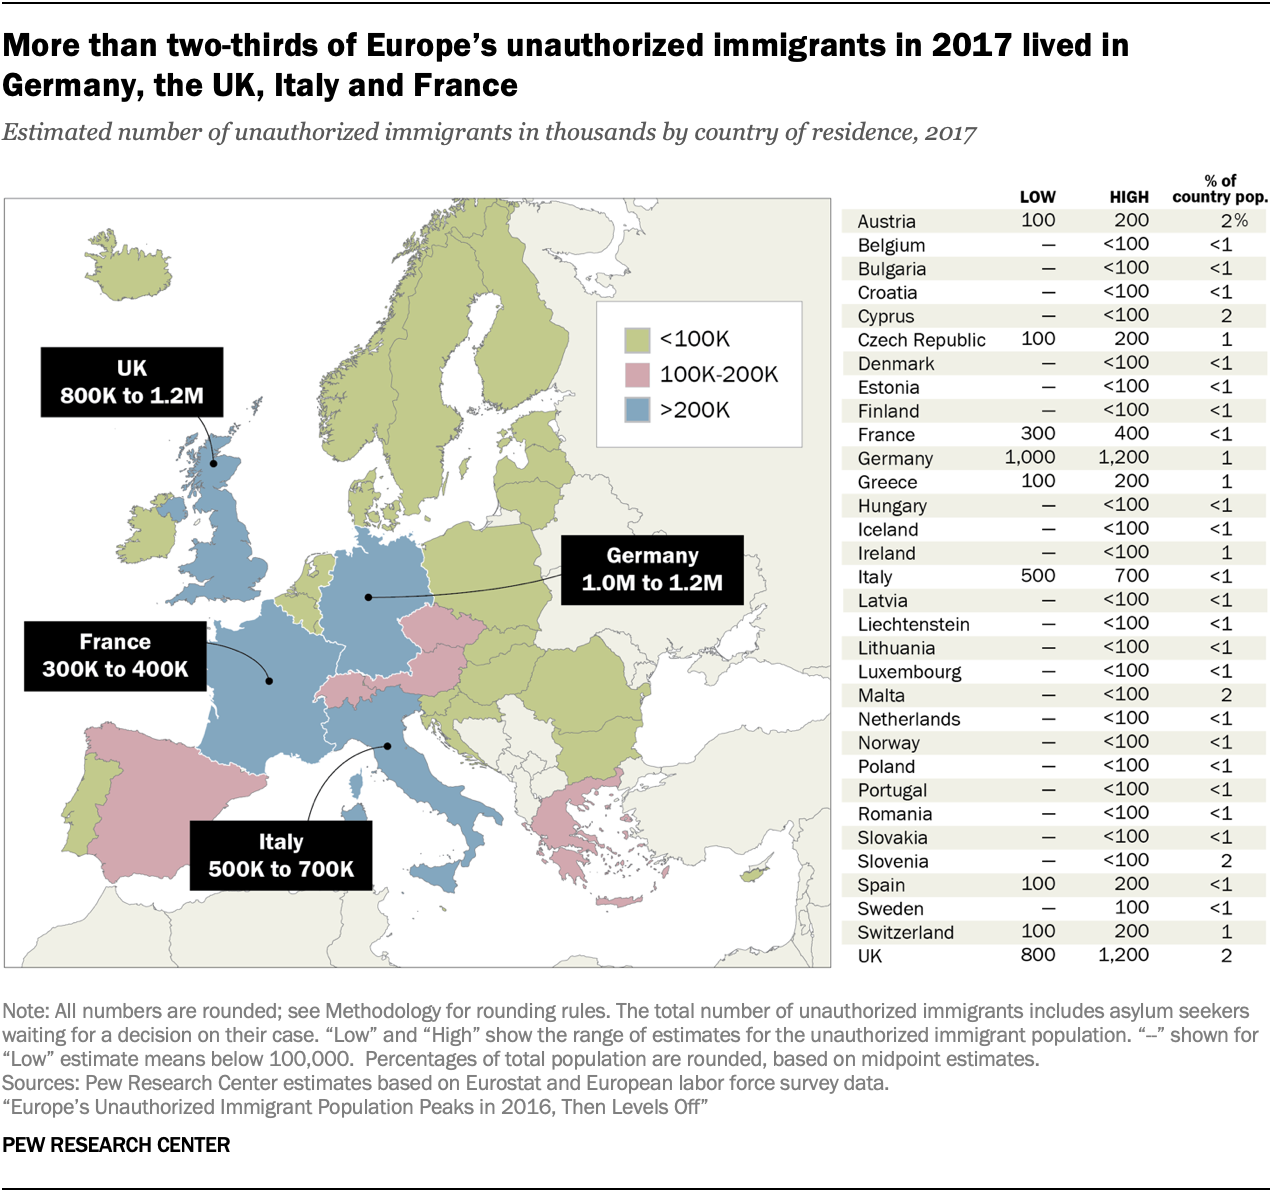 A chart showing More than two-thirds of Europe's unauthorized immigrants in 2017 lived in Germany, the UK, Italy and France